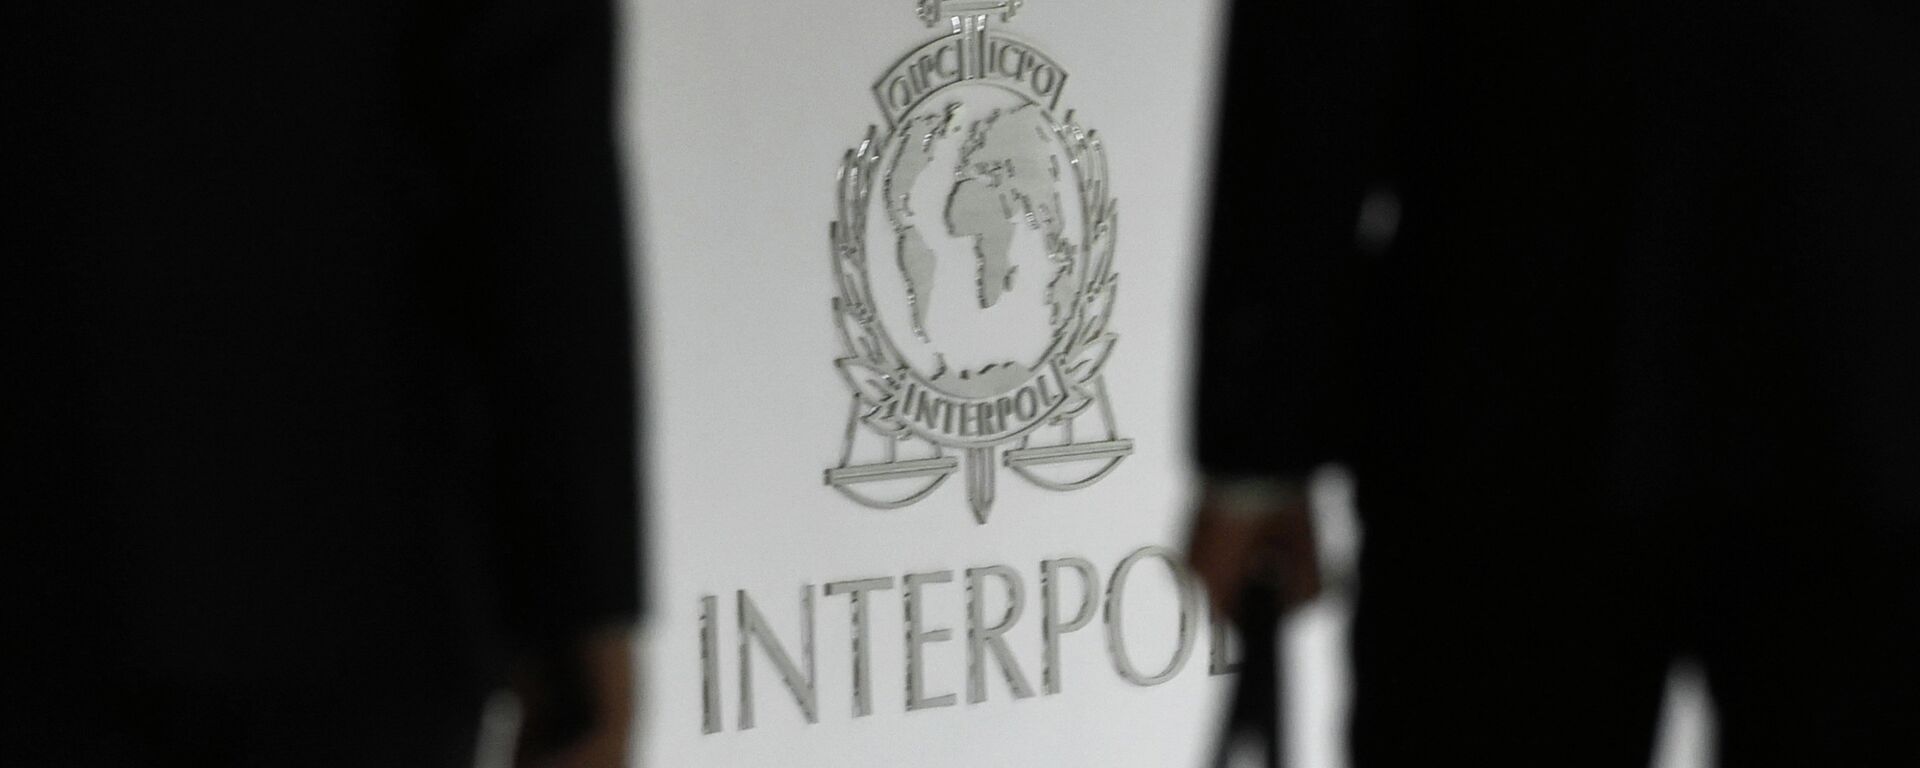 A logo at the newly completed Interpol Global Complex for Innovation building is seen during the inauguration opening ceremony in Singapore on April 13, 2015 - Sputnik International, 1920, 12.03.2022